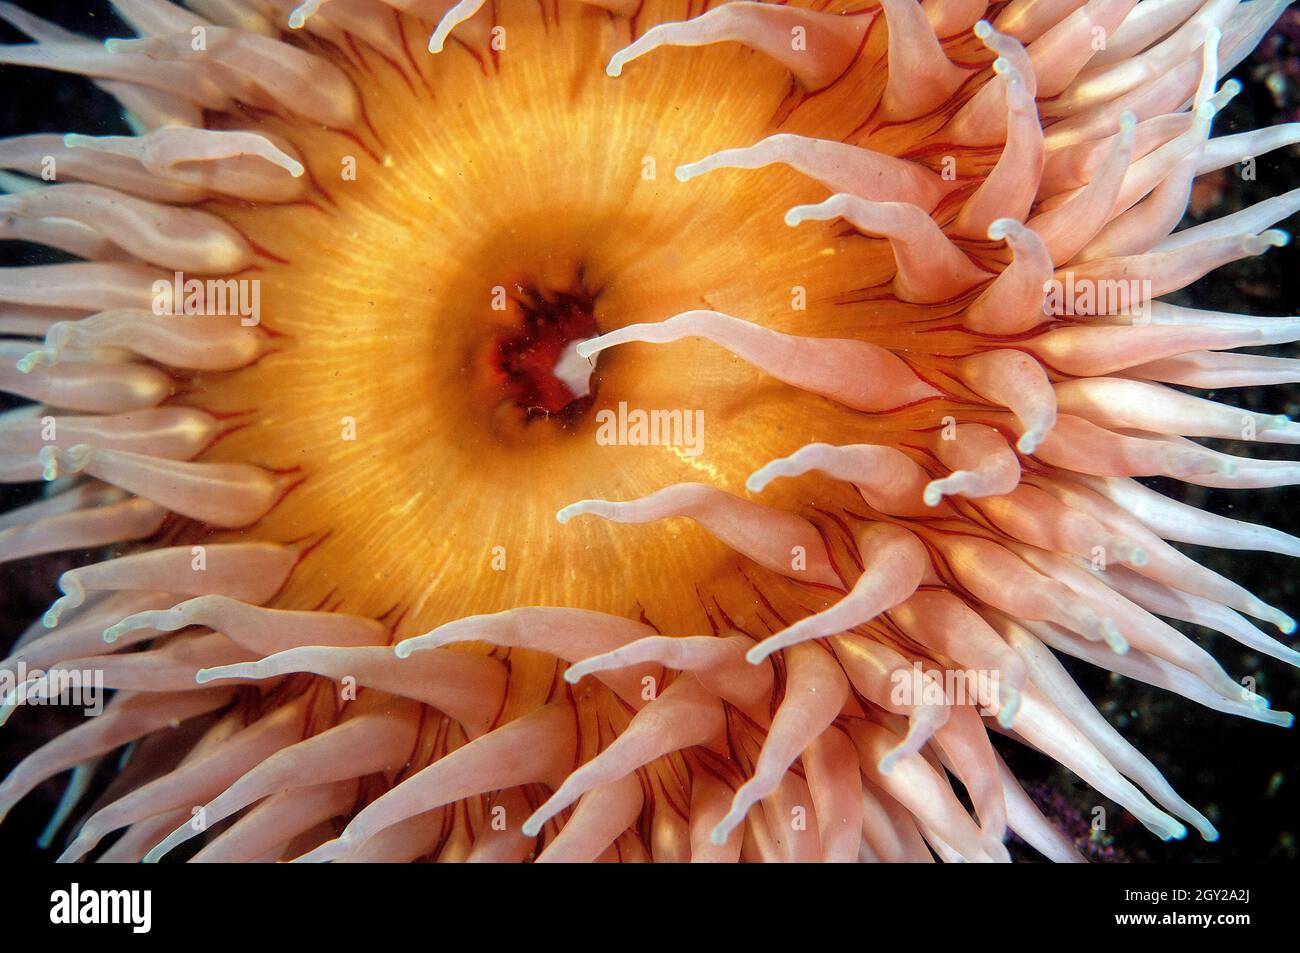 Painted or Christmas anemone, Urticina grebelnyi, Point Lobos State Natural Reserve, California, USA Stock Photo